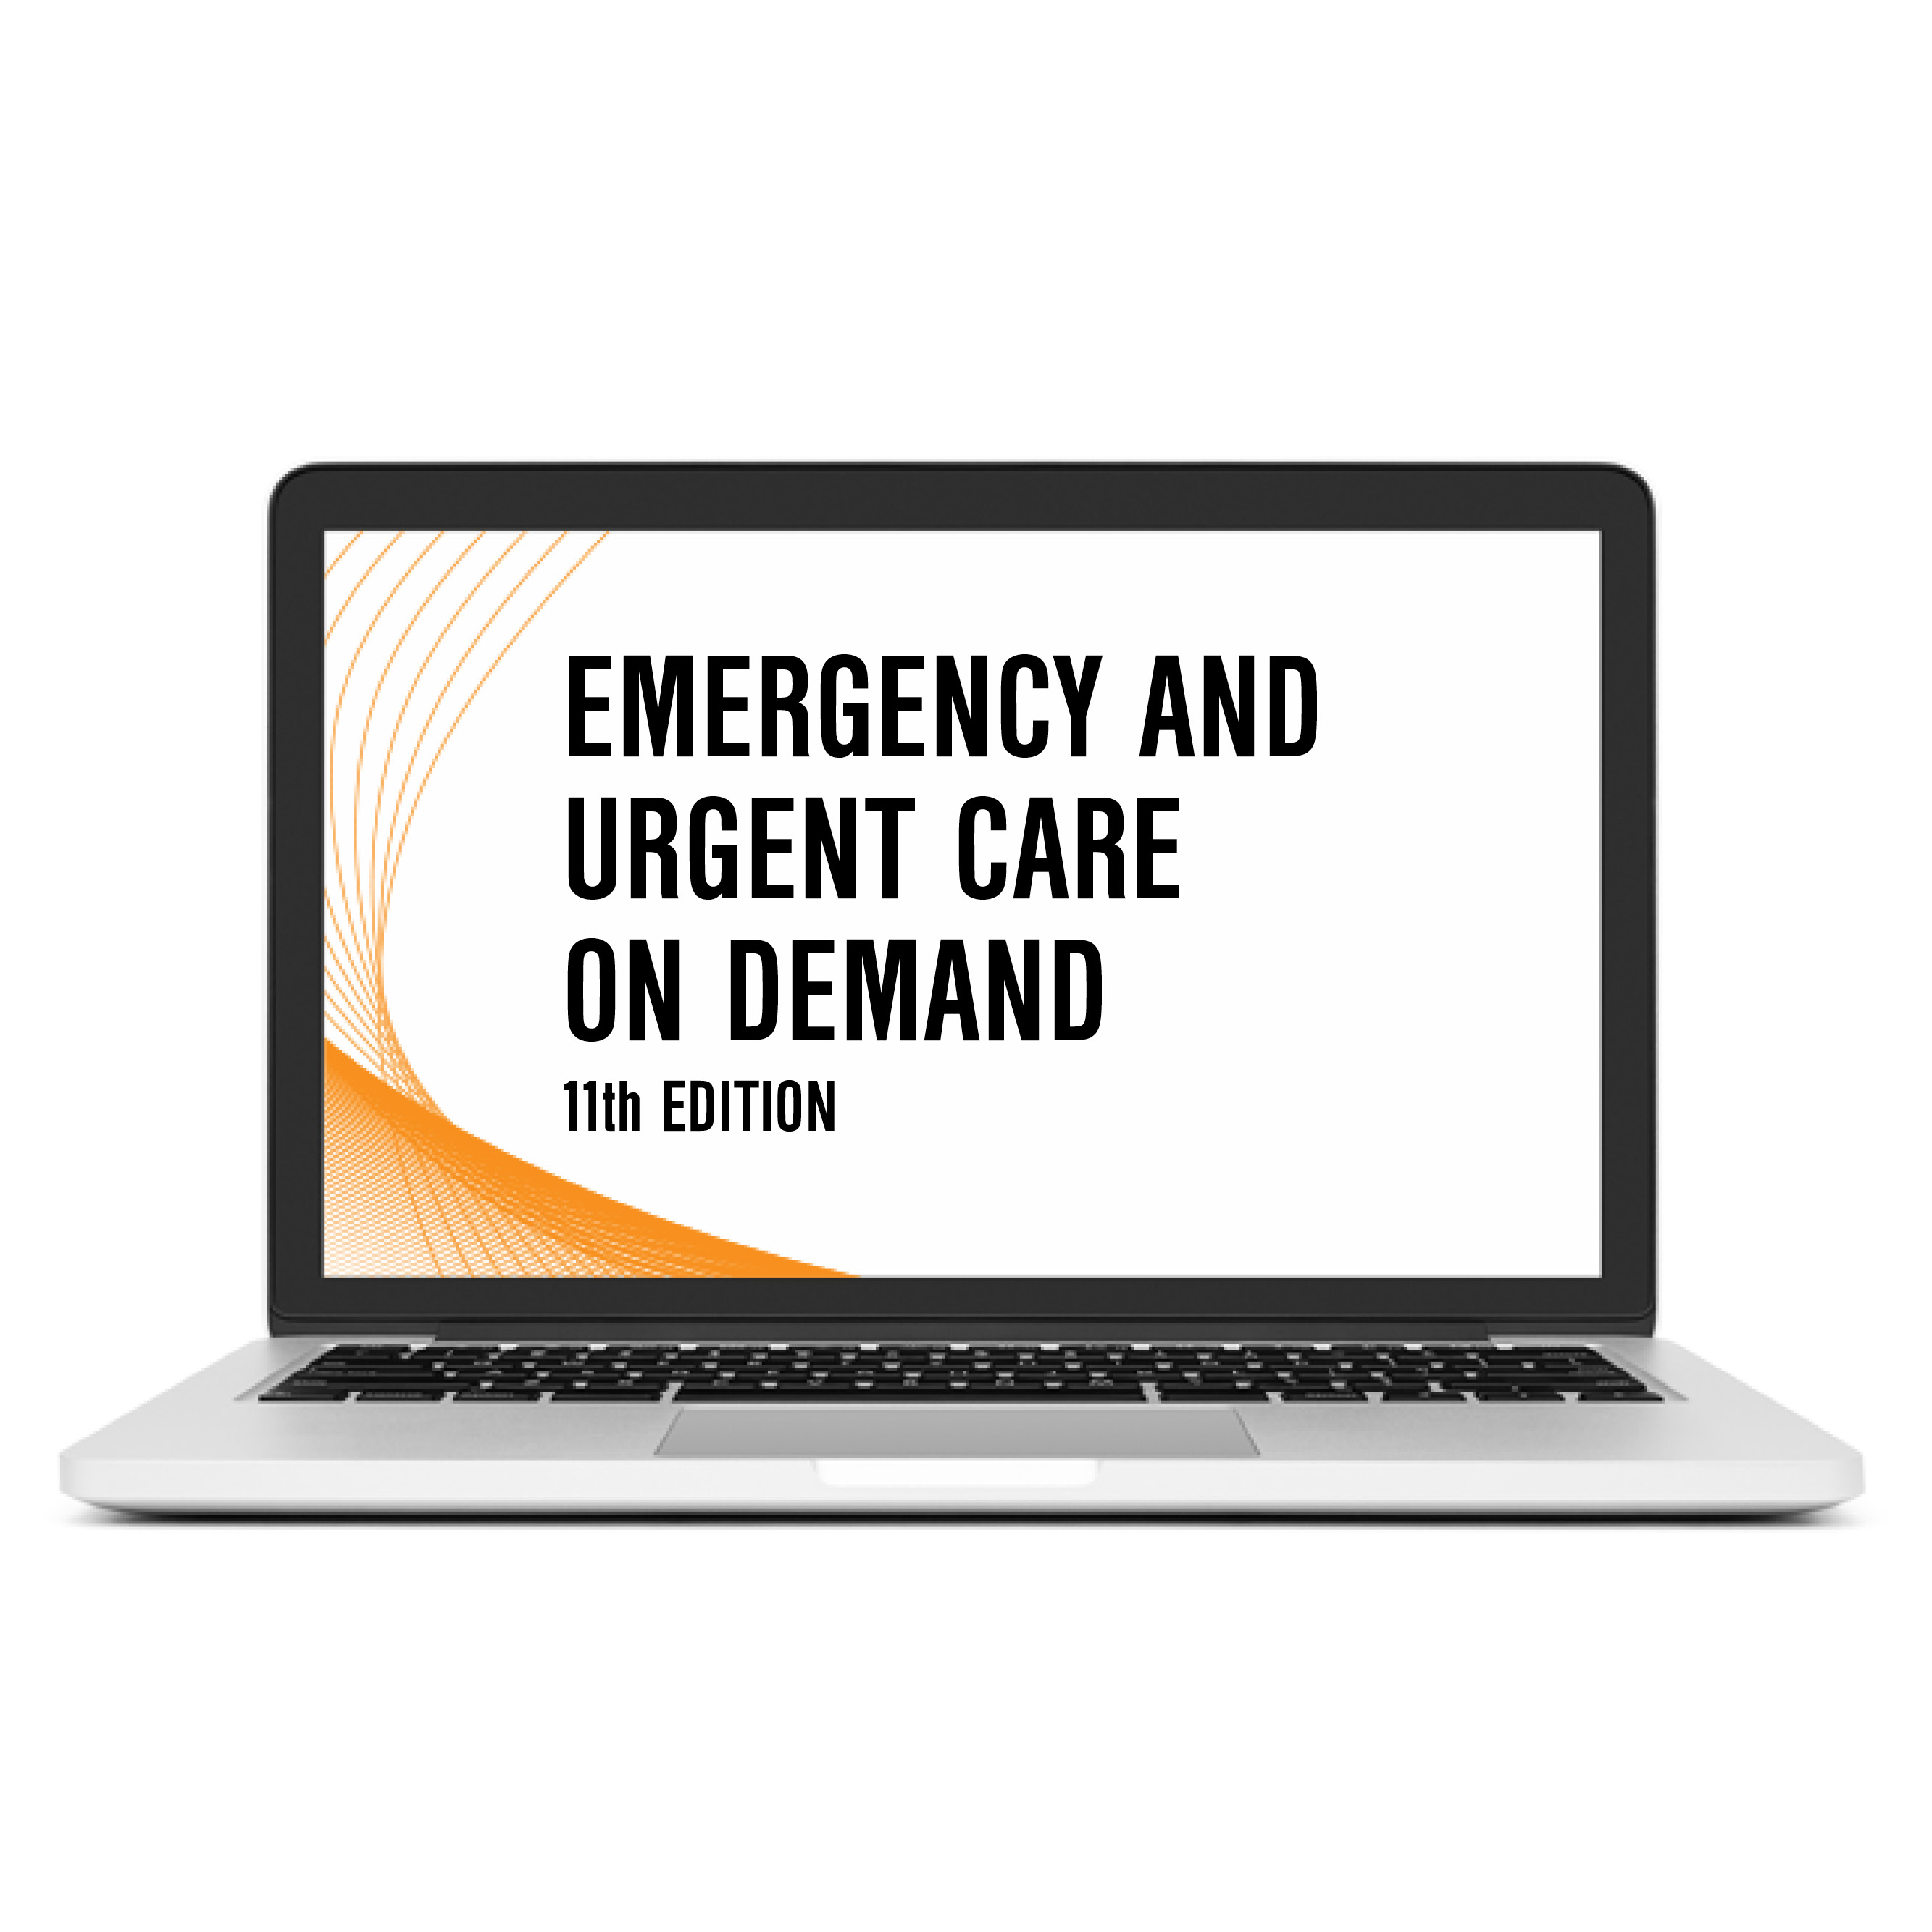 Emergency and Urgent Care On Demand on Laptop Screen